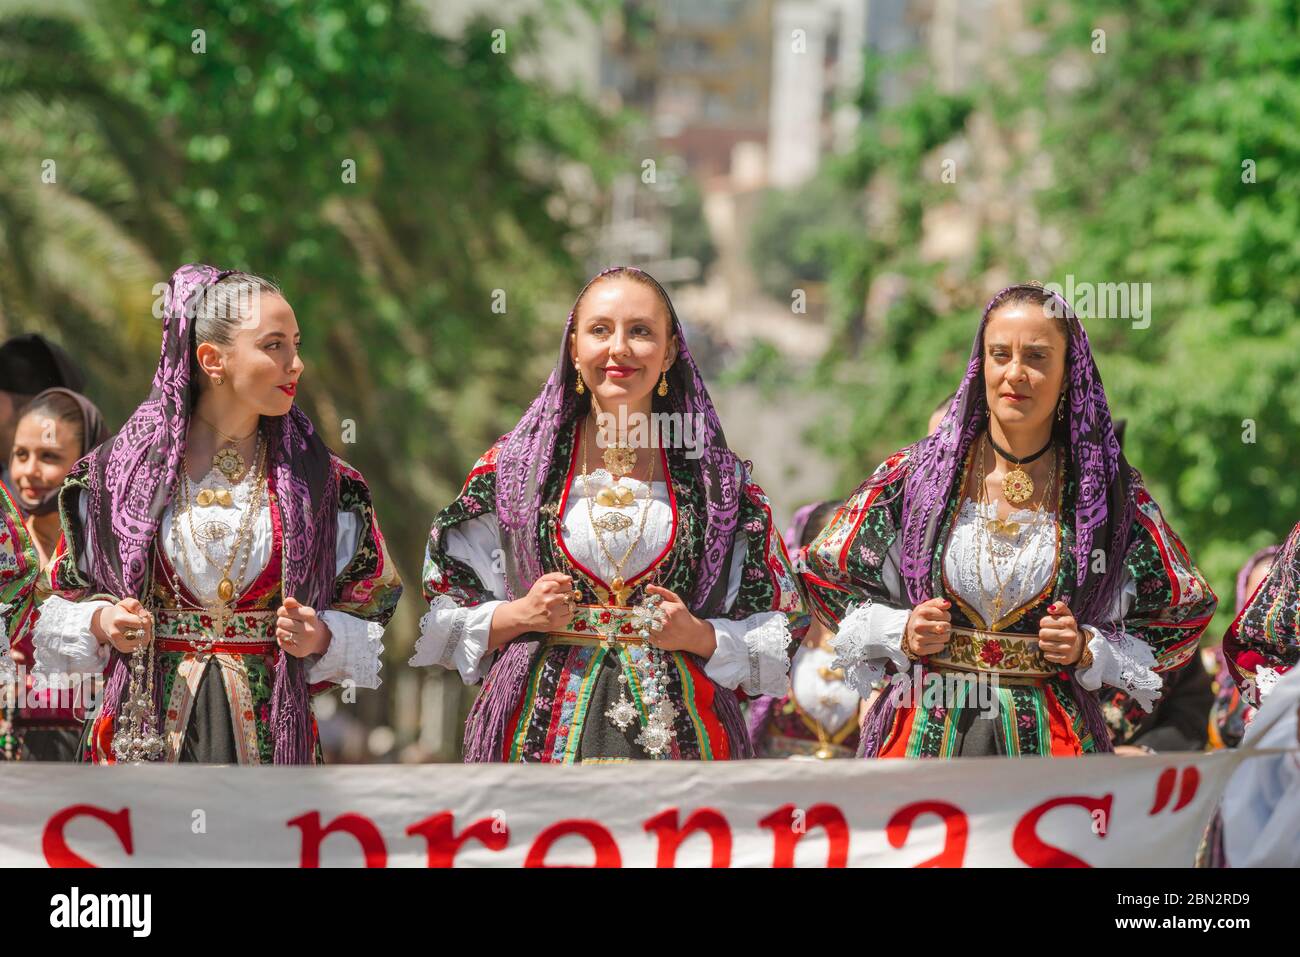 Traditional costume, portrait of three young women in traditional costume during the grand parade of the Cavalcata festival in Sassari, Sardinia Stock Photo